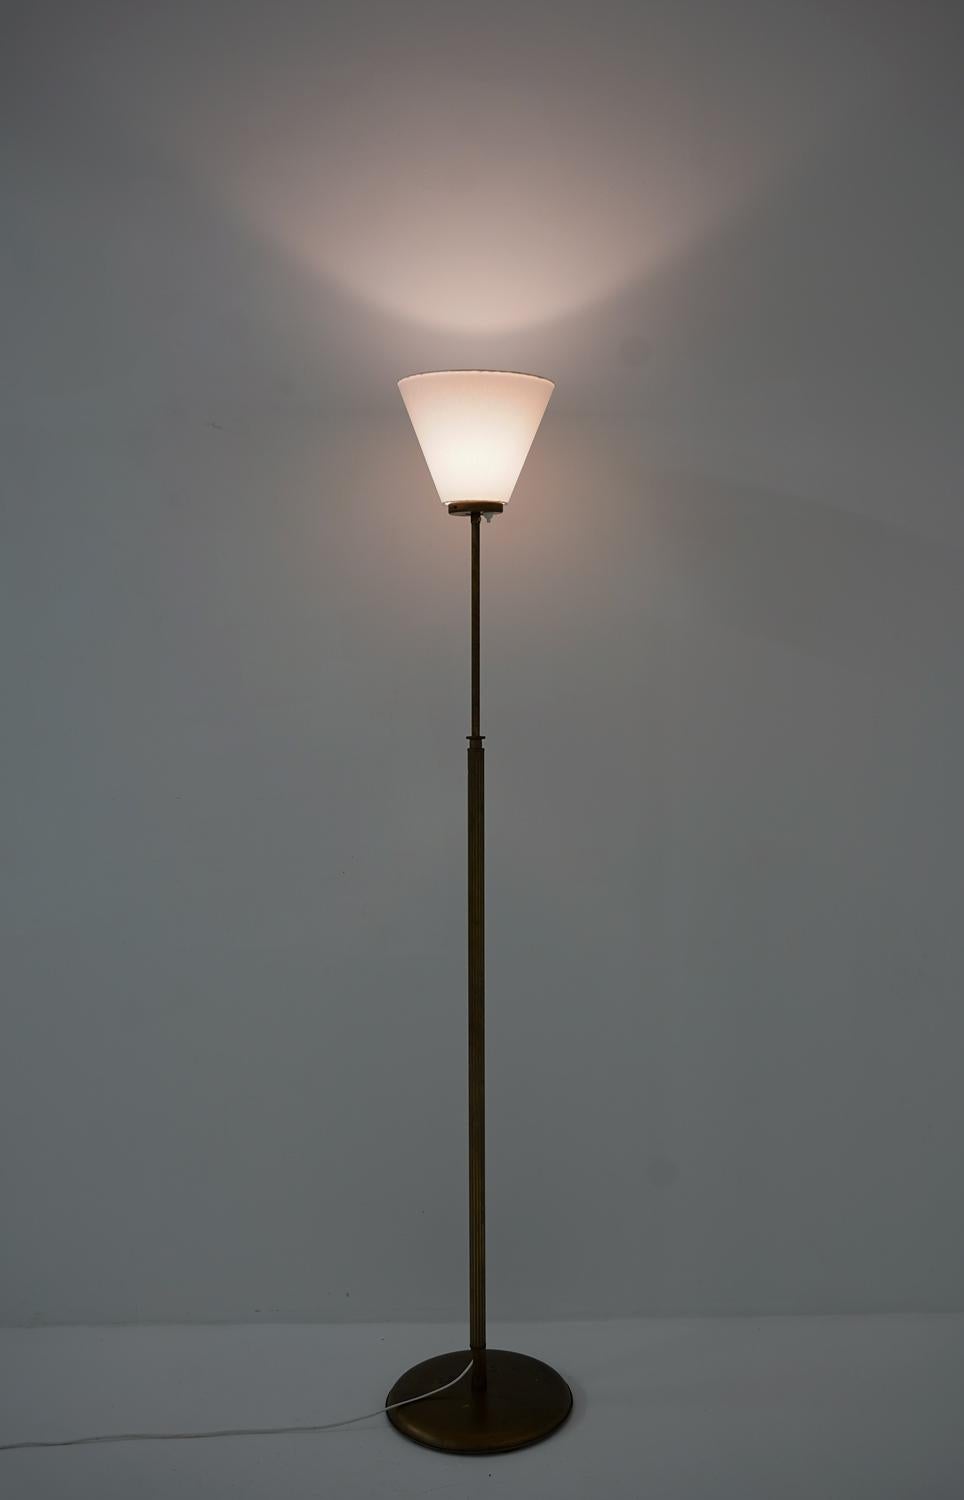 Pair of Swedish Modern Uplight Floor Lamps in Brass, 1940s For Sale 3